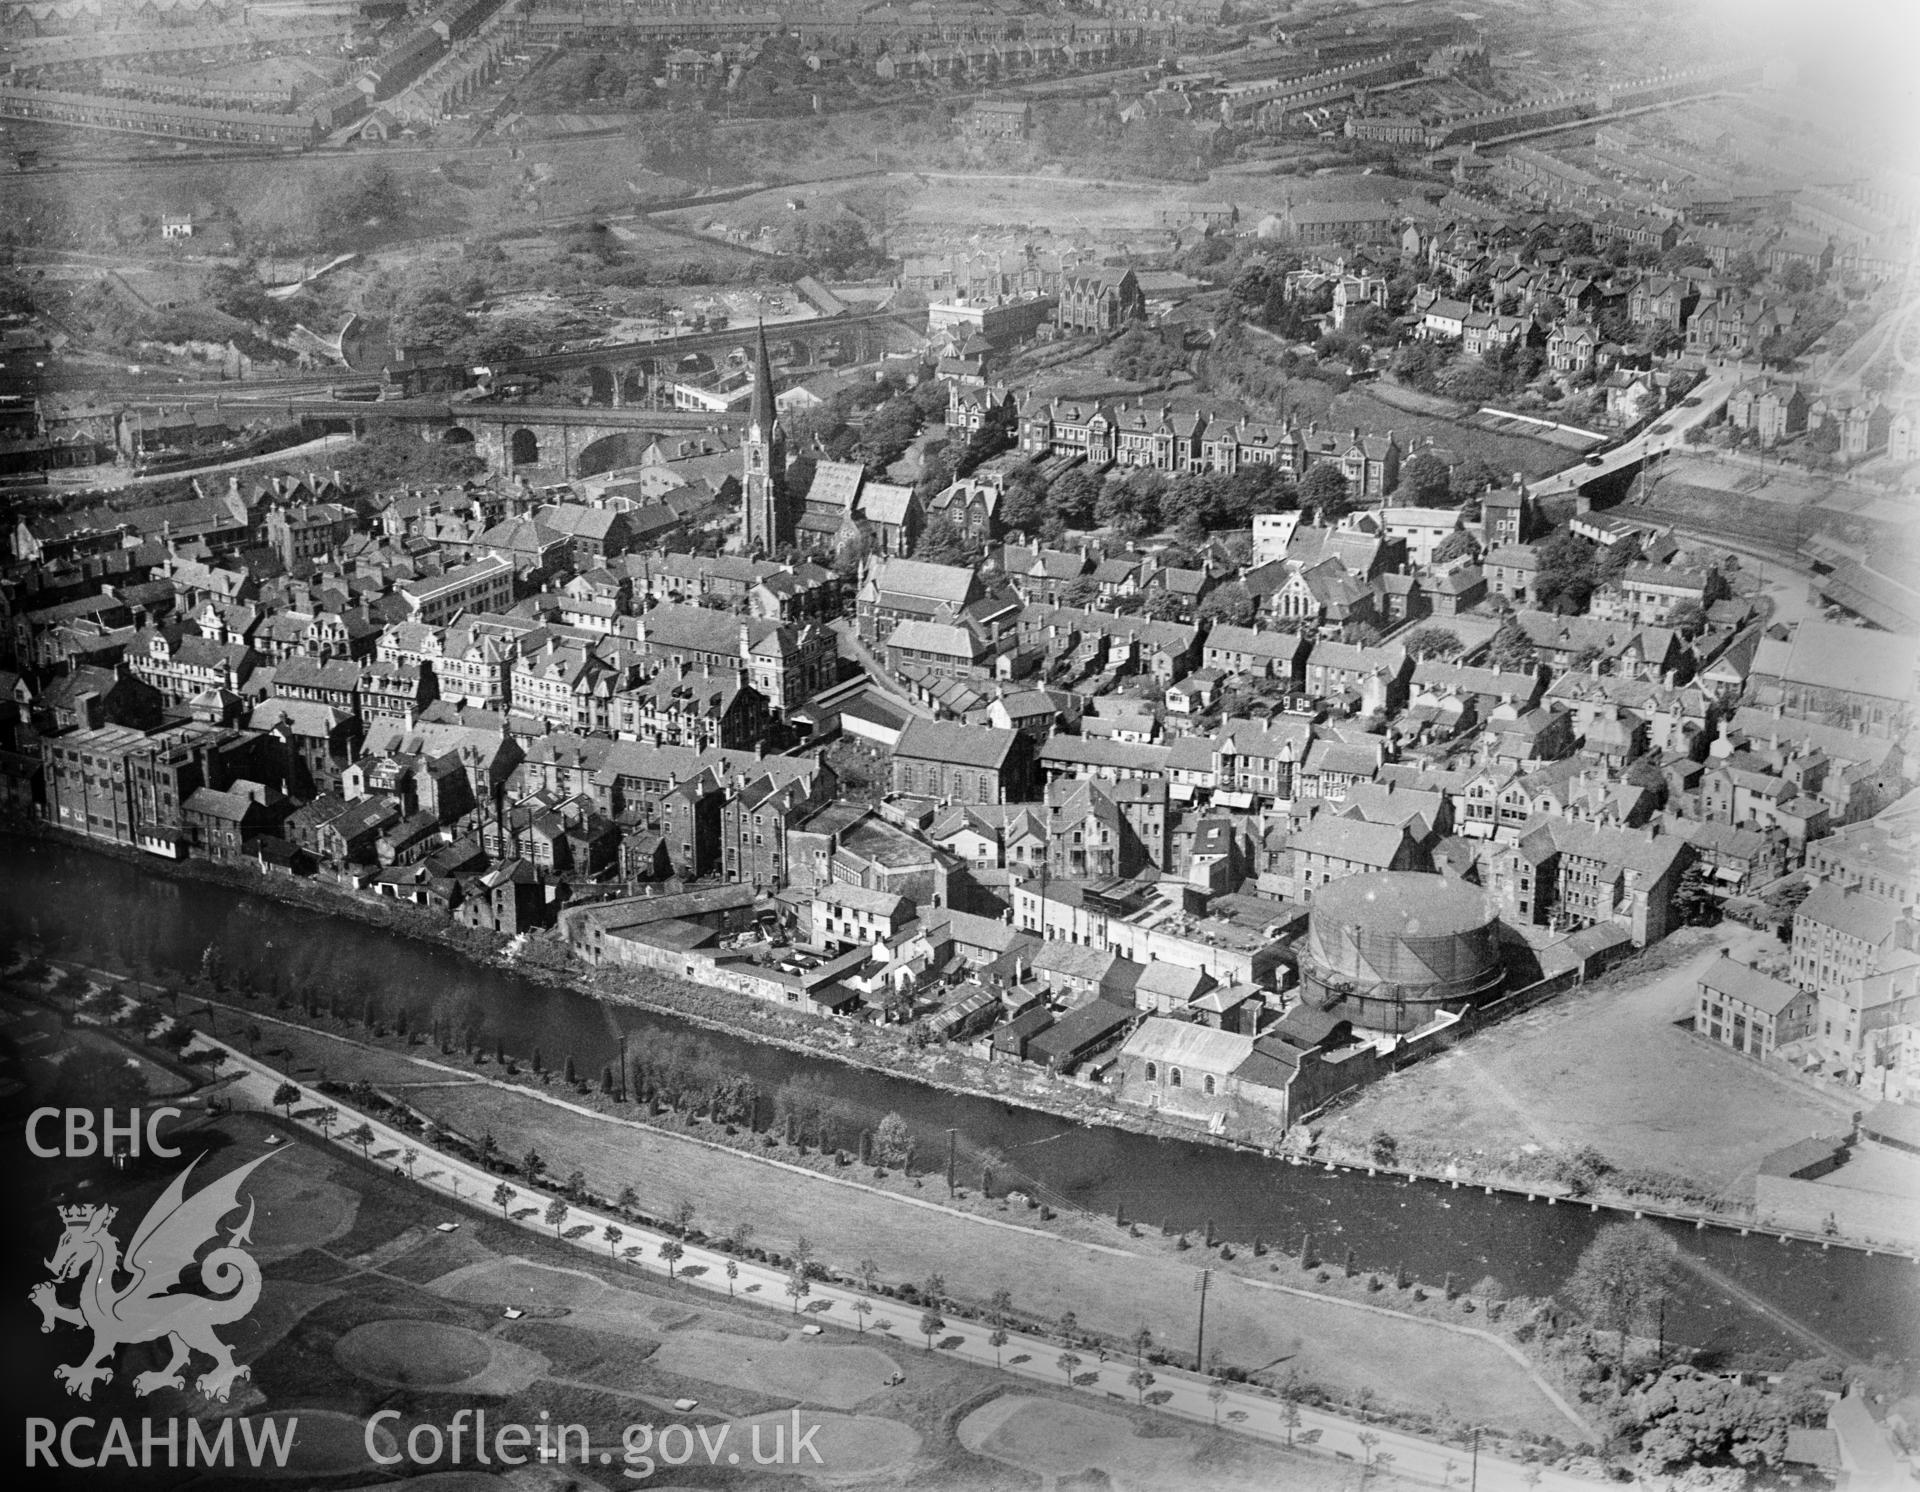 View of Pontypridd showing Ynysangharad Park, oblique aerial view. 5?x4? black and white glass plate negative.